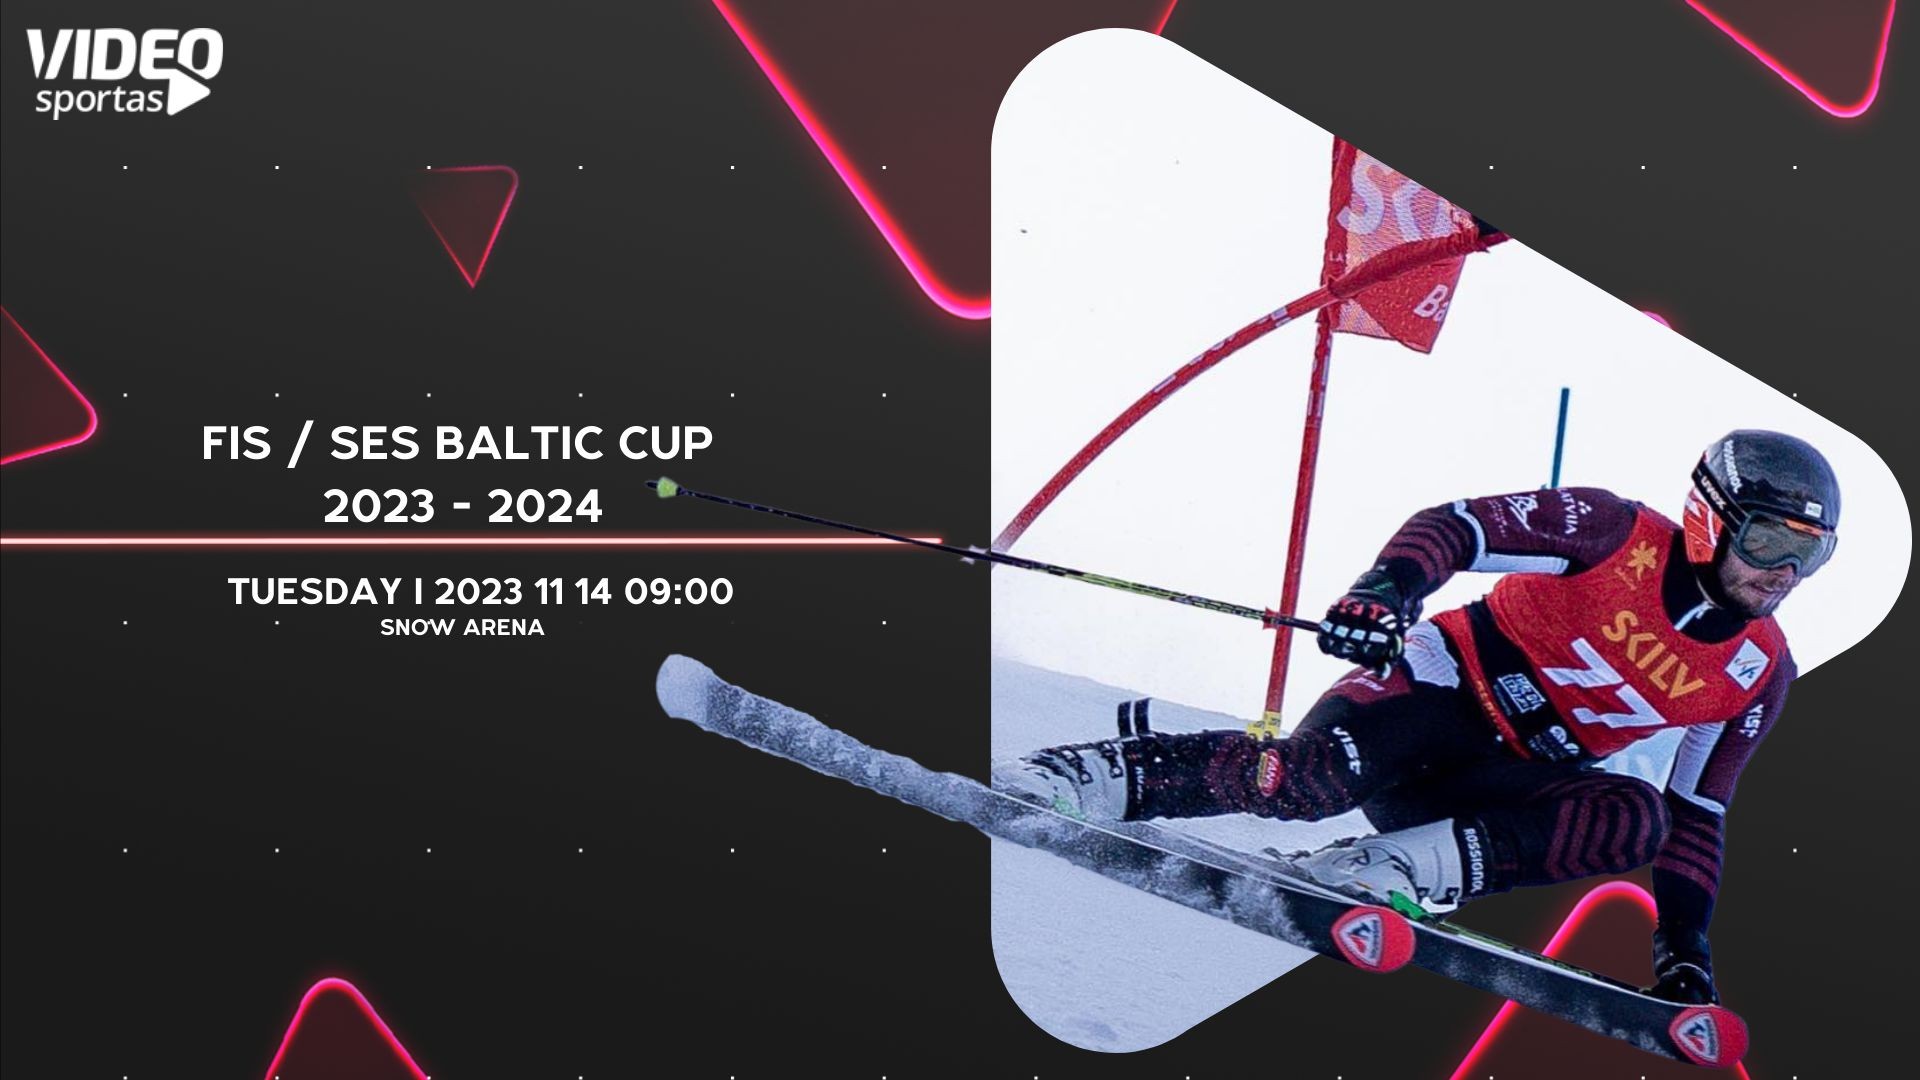 1 DAY - FIS / SES BALTIC CUP